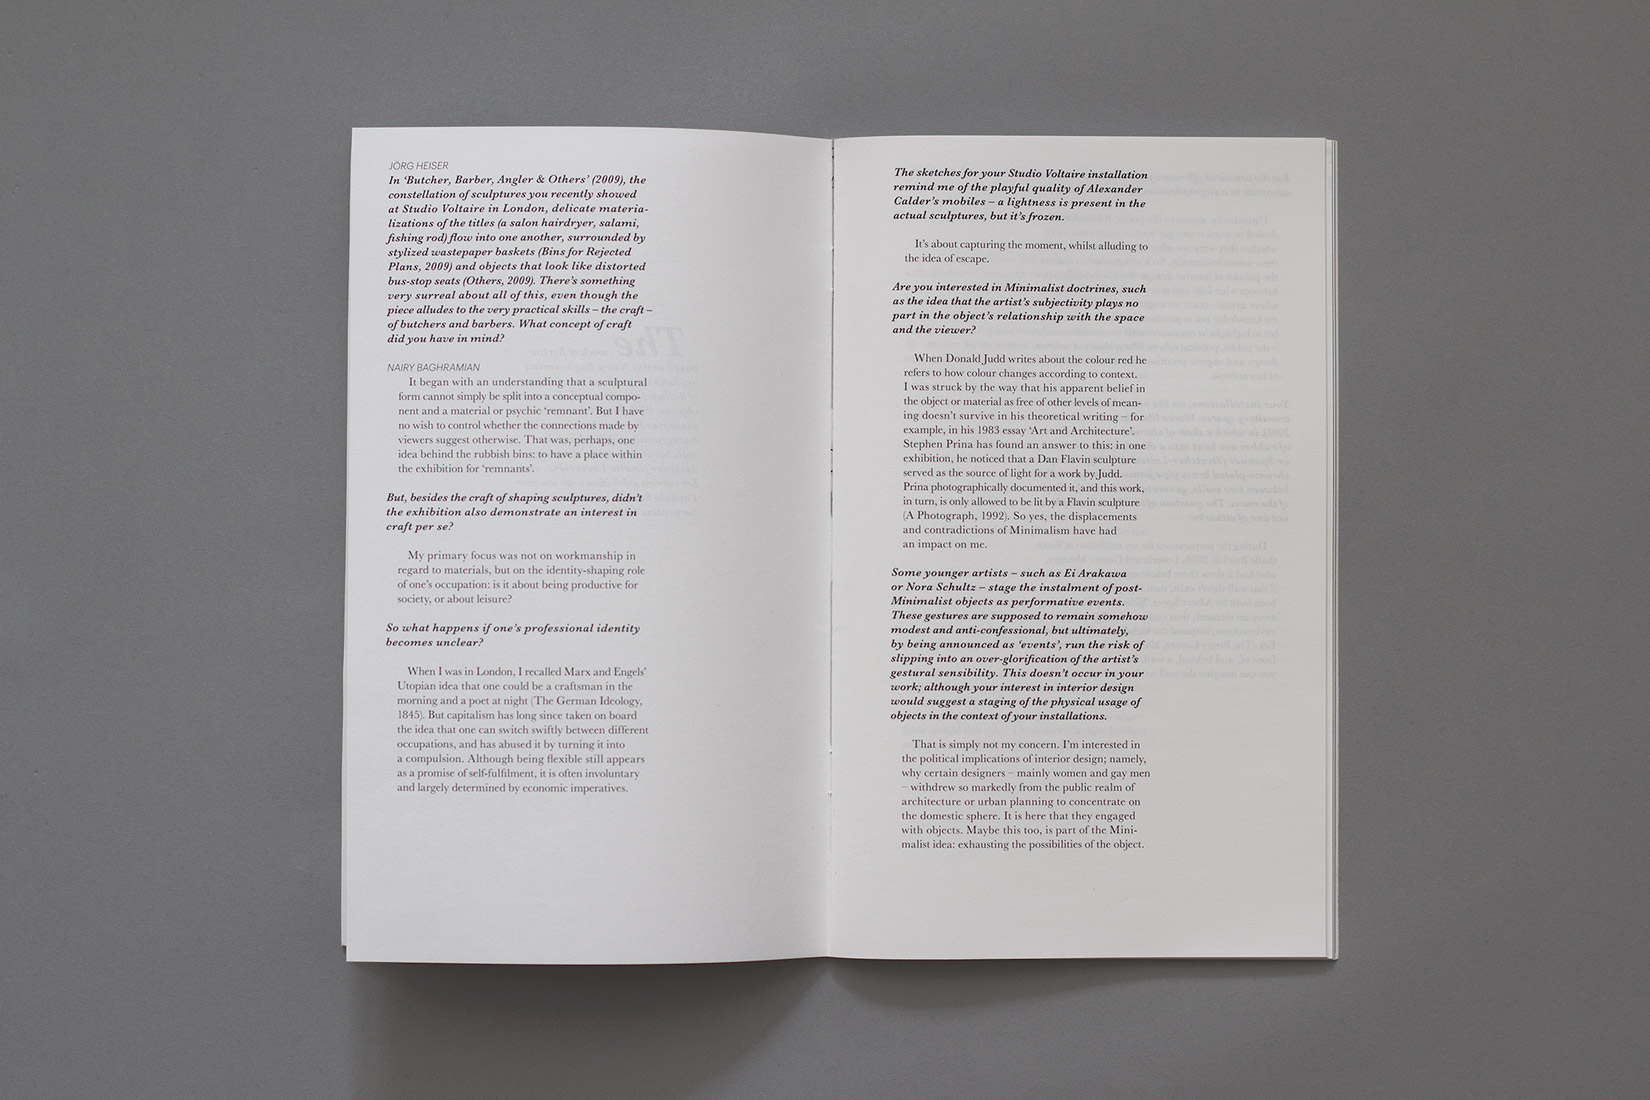 Mise en page, interview, livre d'artiste, Nairy Baghramian, typographie